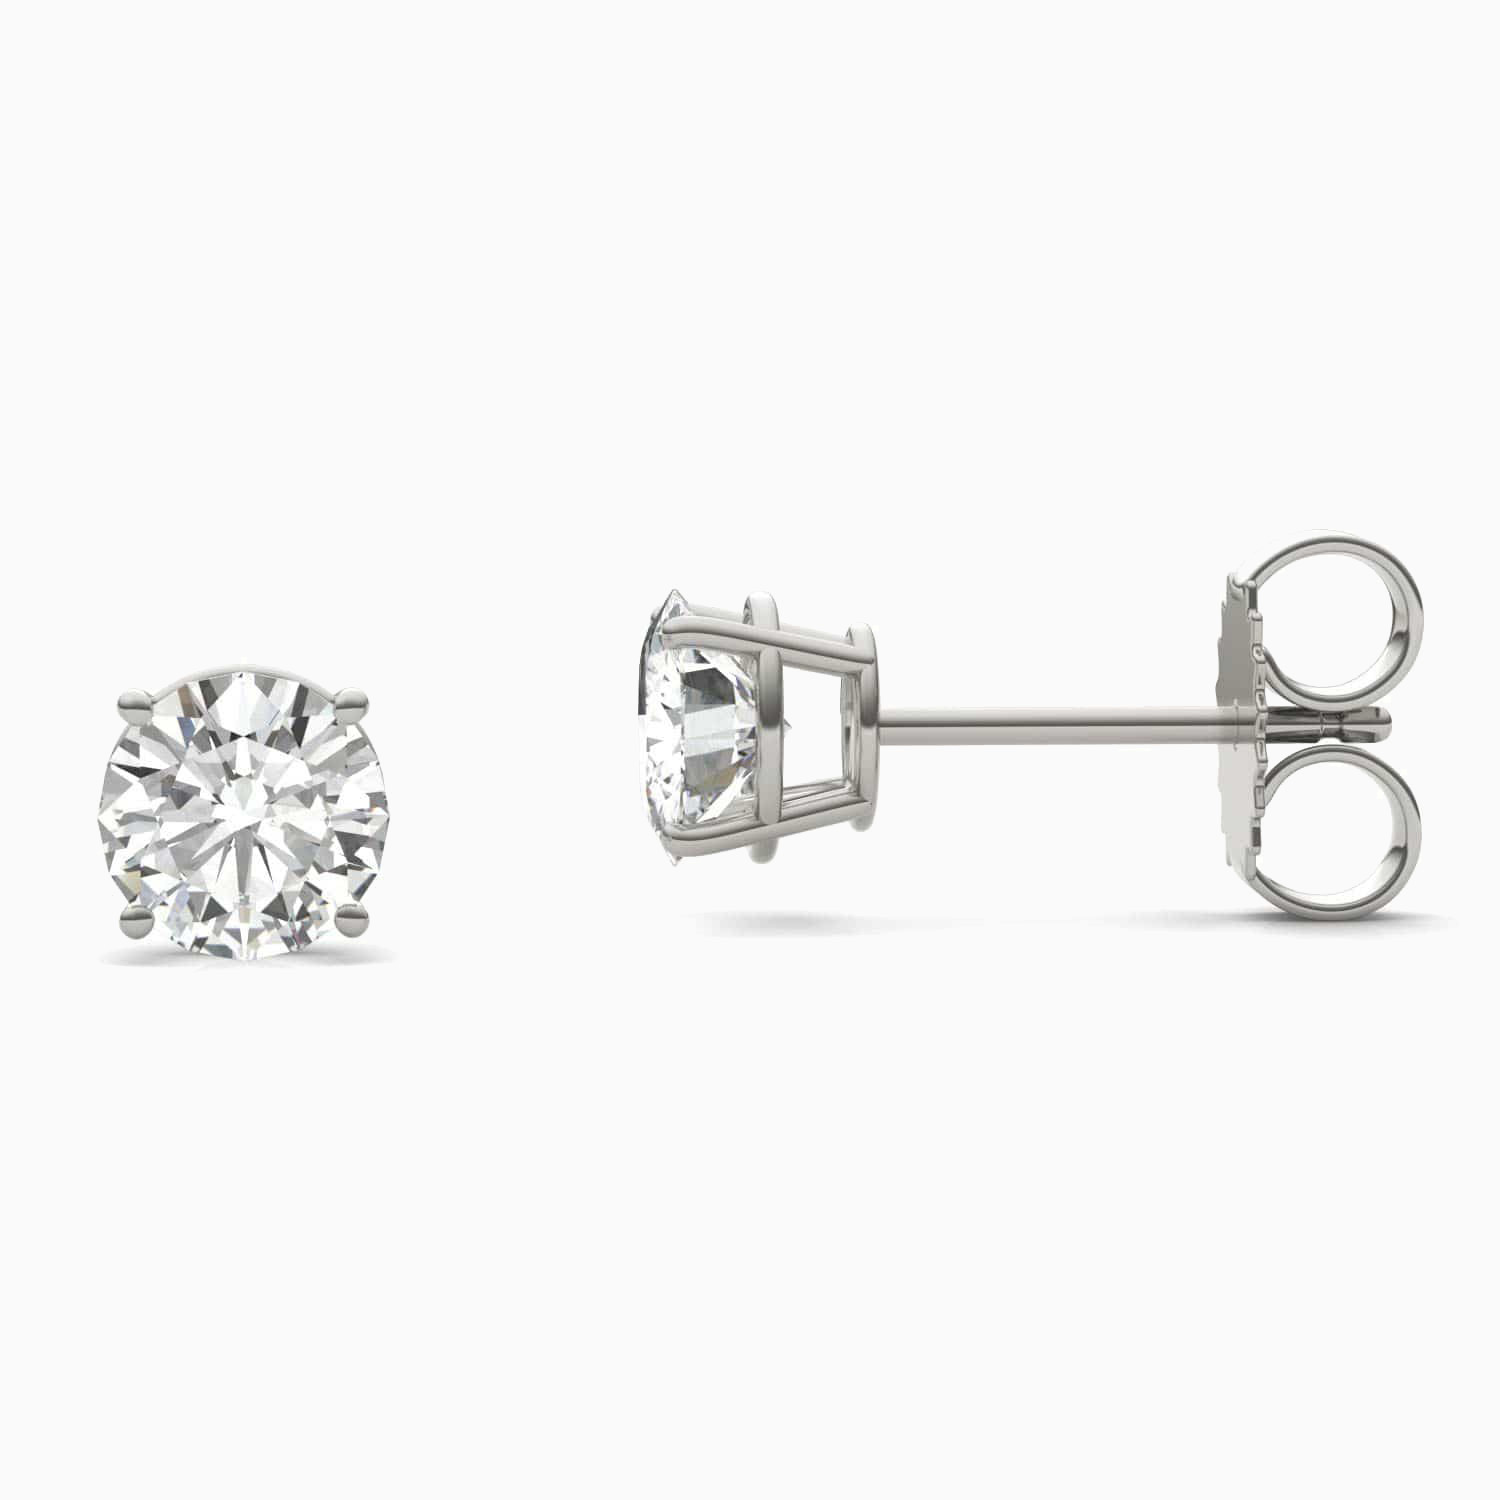 Moissanite Studs Earrings Round Solitaire 2 Carat